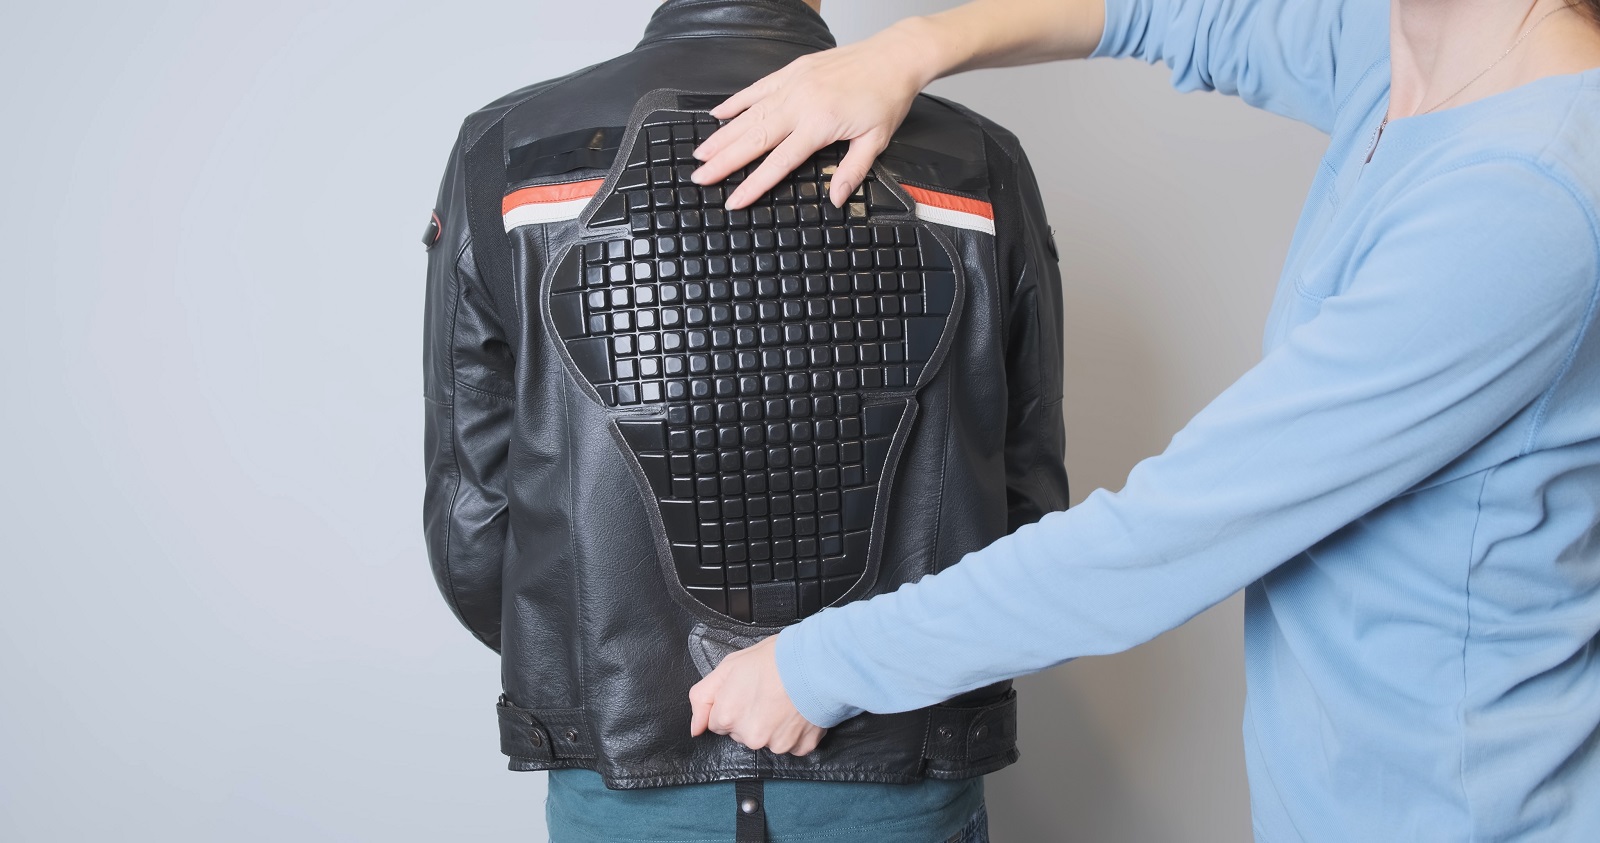 <p class="wp-caption-text">Image Credit: Shutterstock / BAprod</p>  <p><span>A back protector provides additional spine protection. Many jackets come with built-in back protectors, or you can purchase one separately.</span></p>